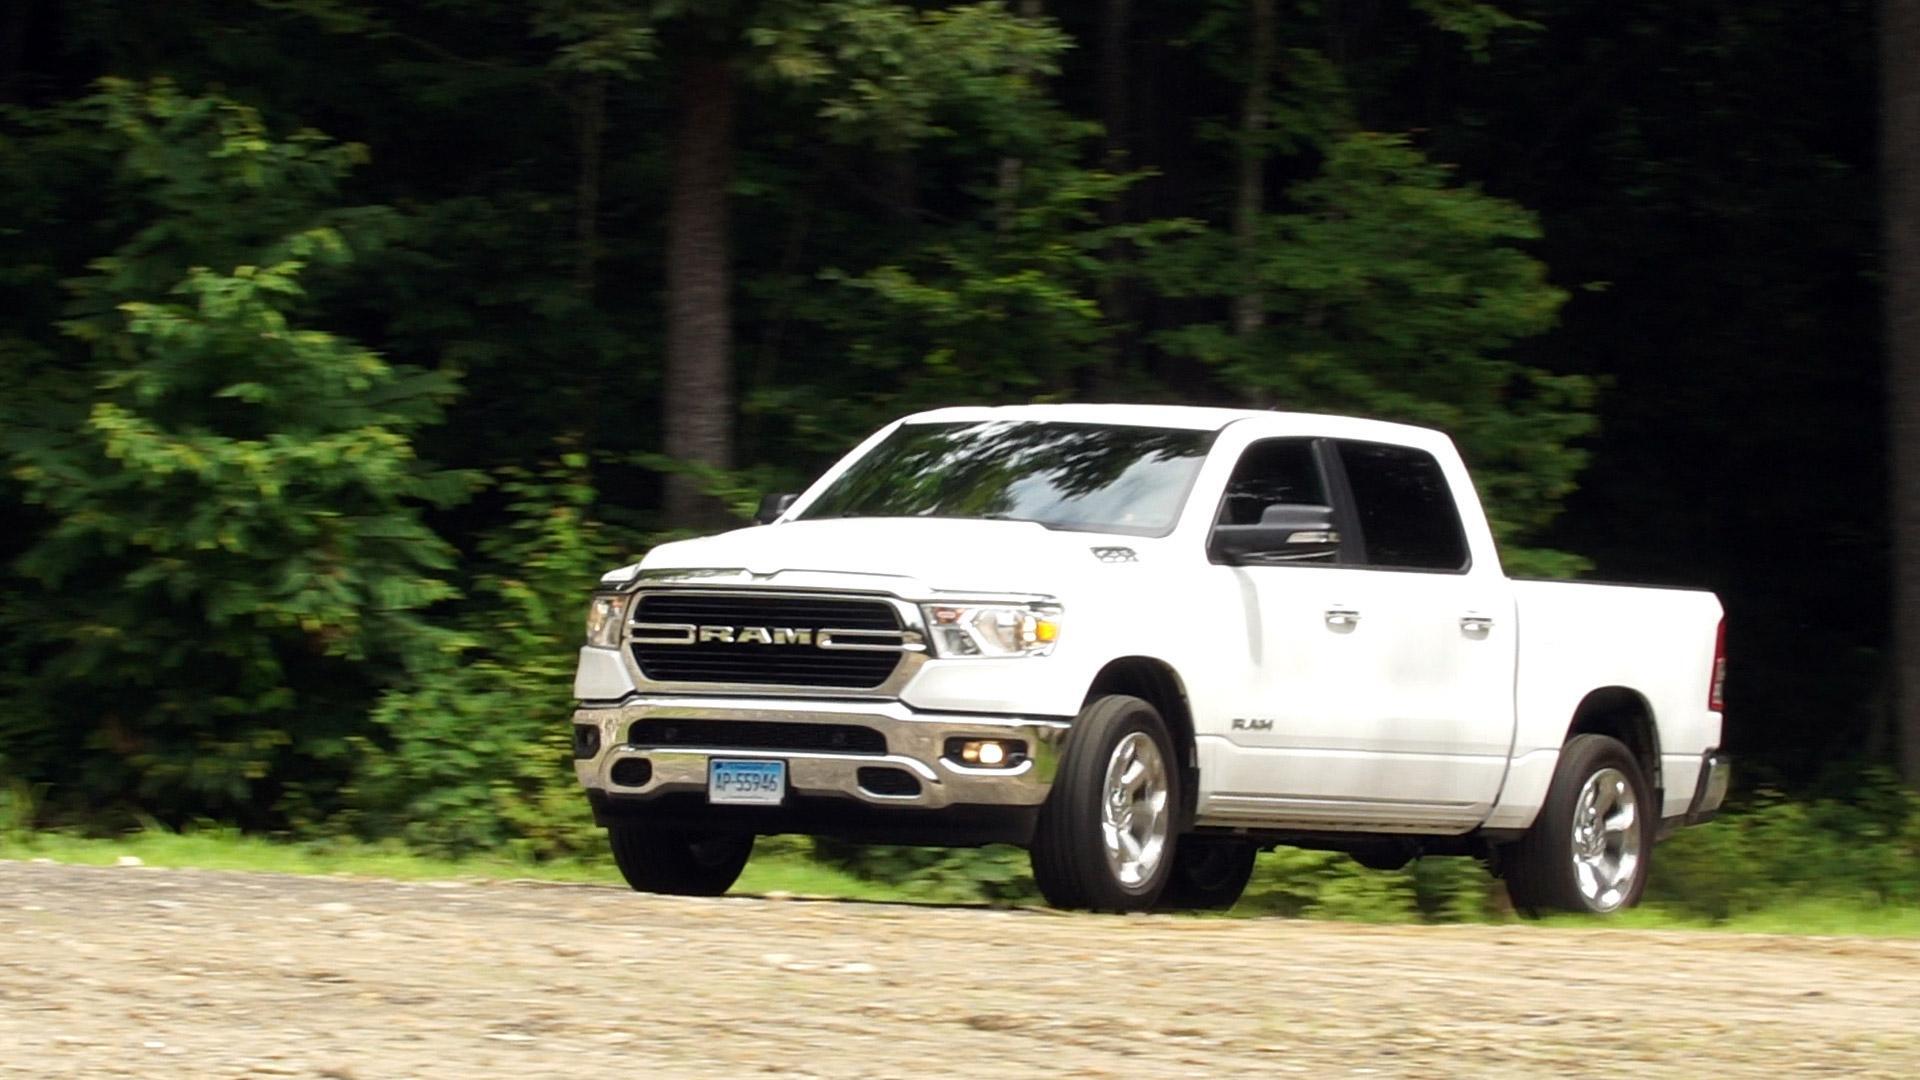 2000 Dodge Ram 1500 Reviews, Insights, and Specs